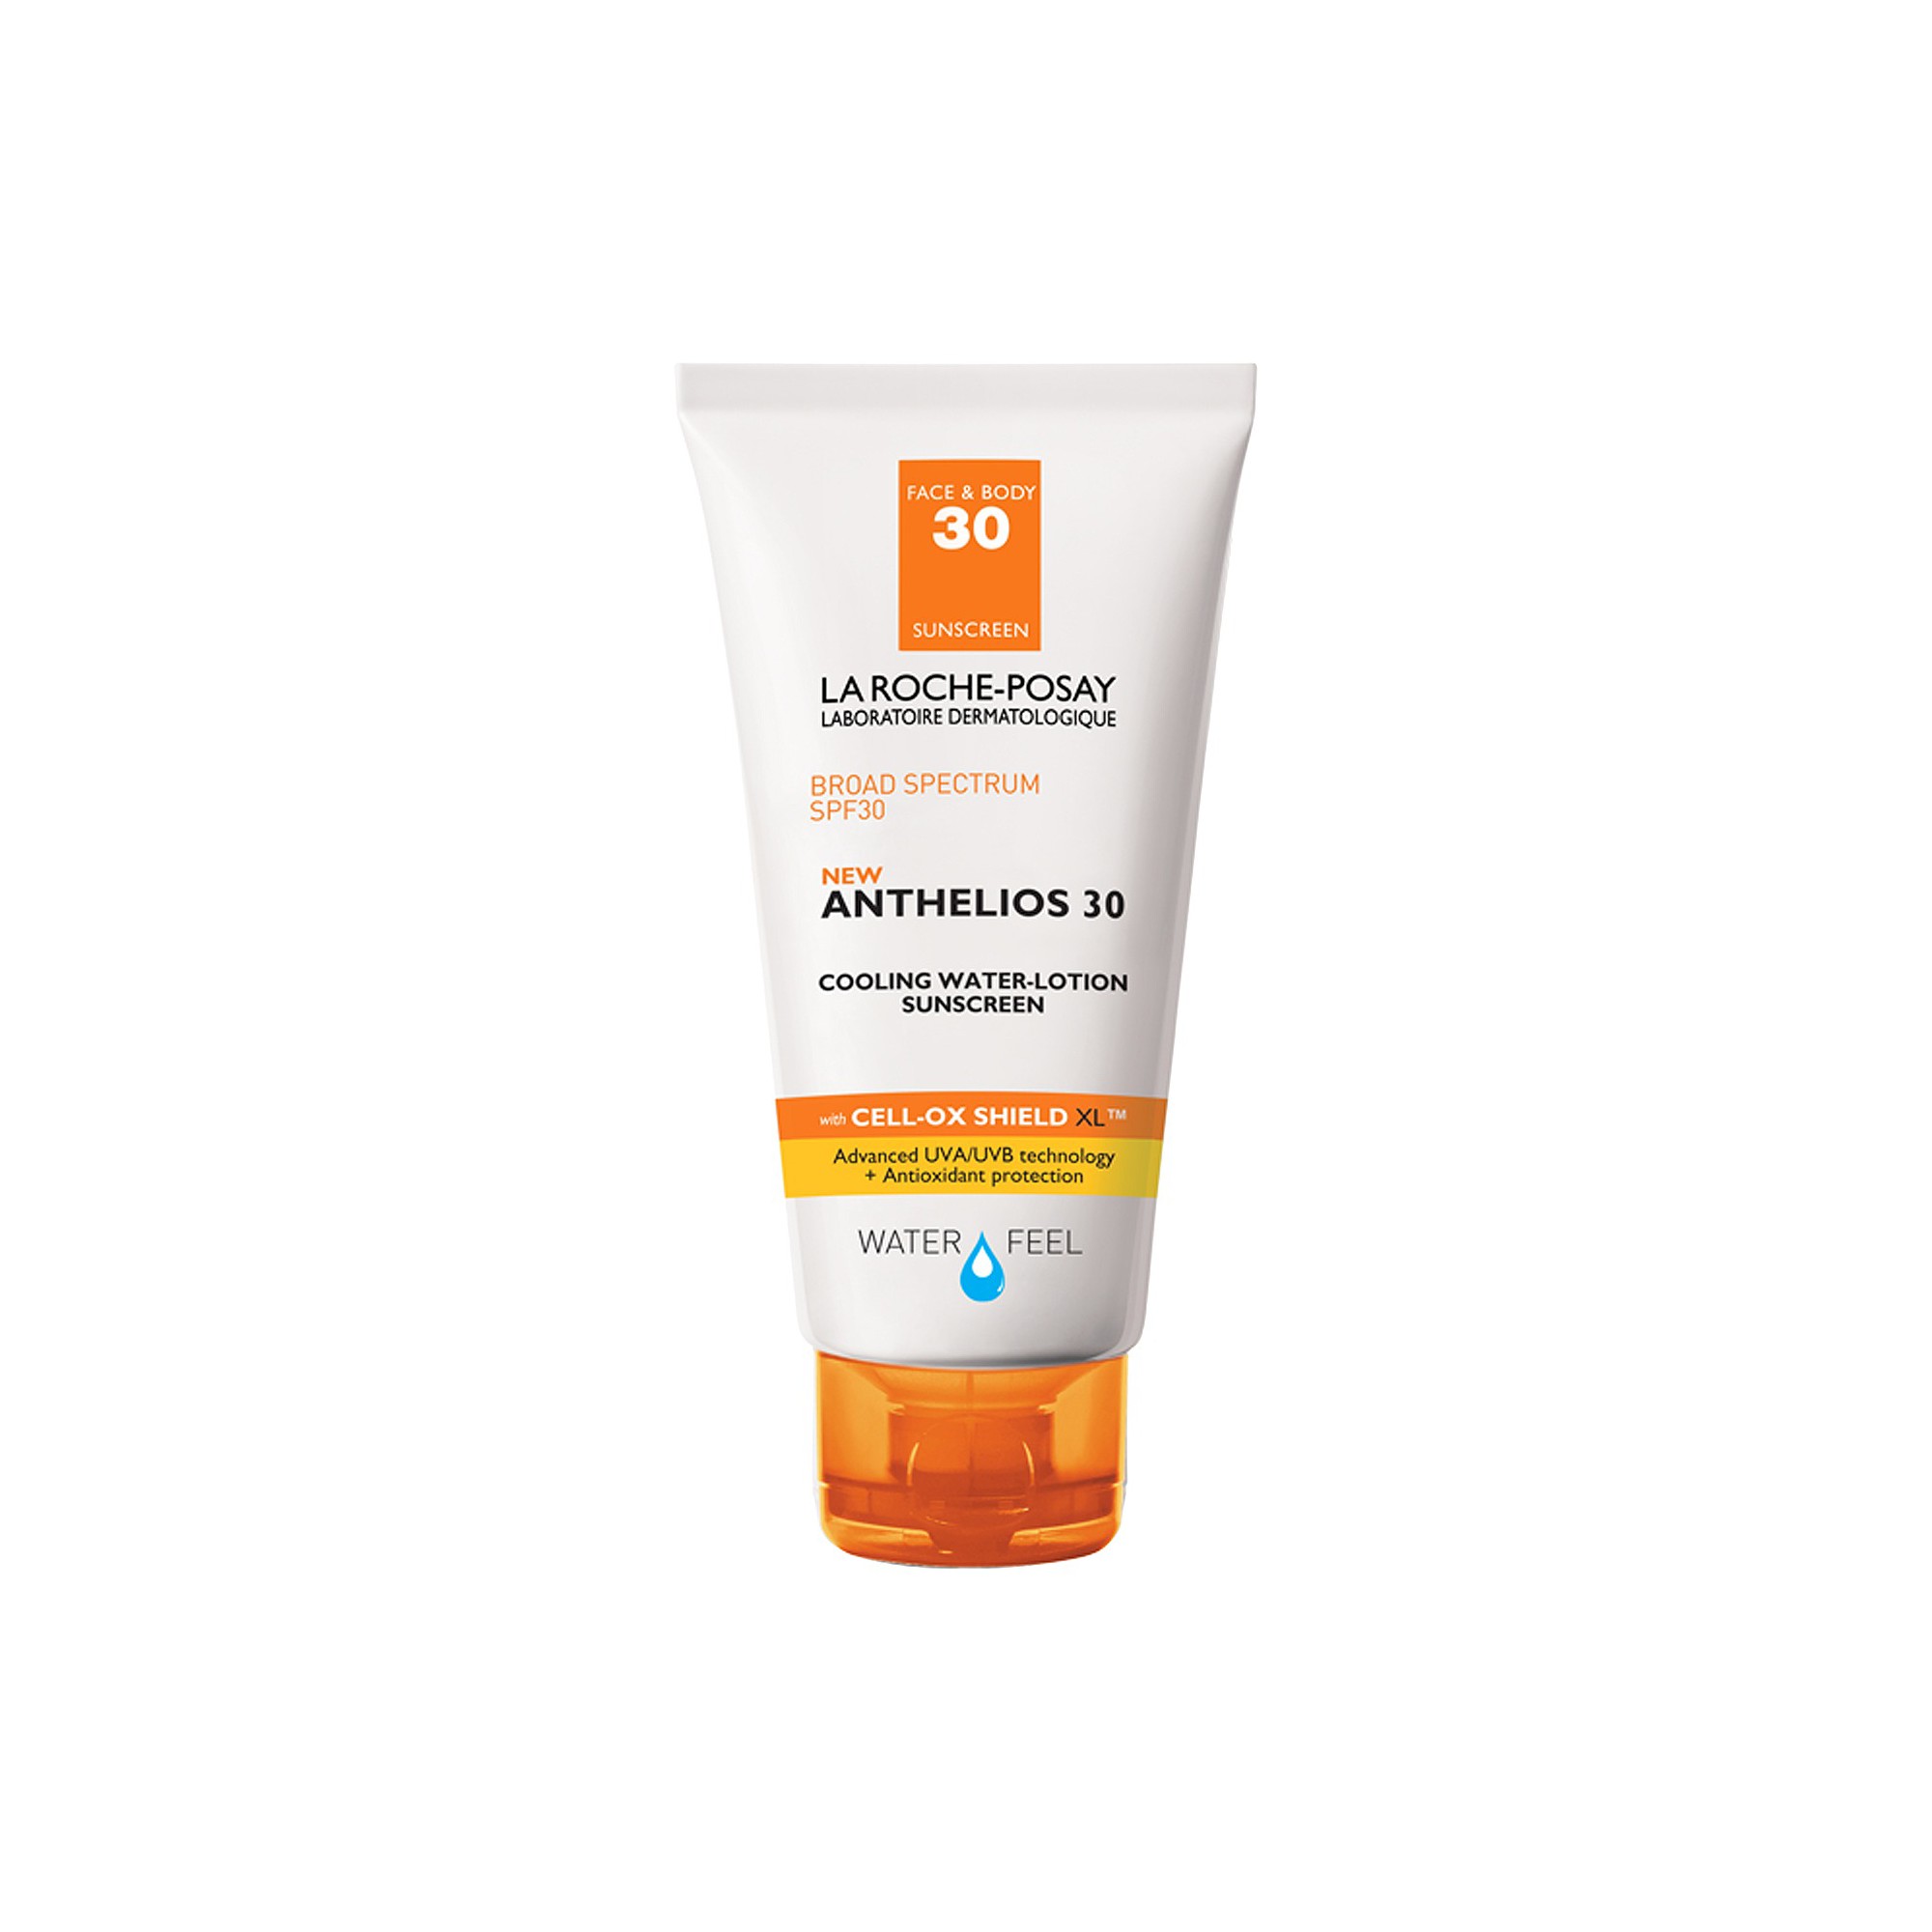 La Roche-Posay Anthelios Cooling Water-Lotion Face and Body Sunscreen SPF 30 - 5.0oz